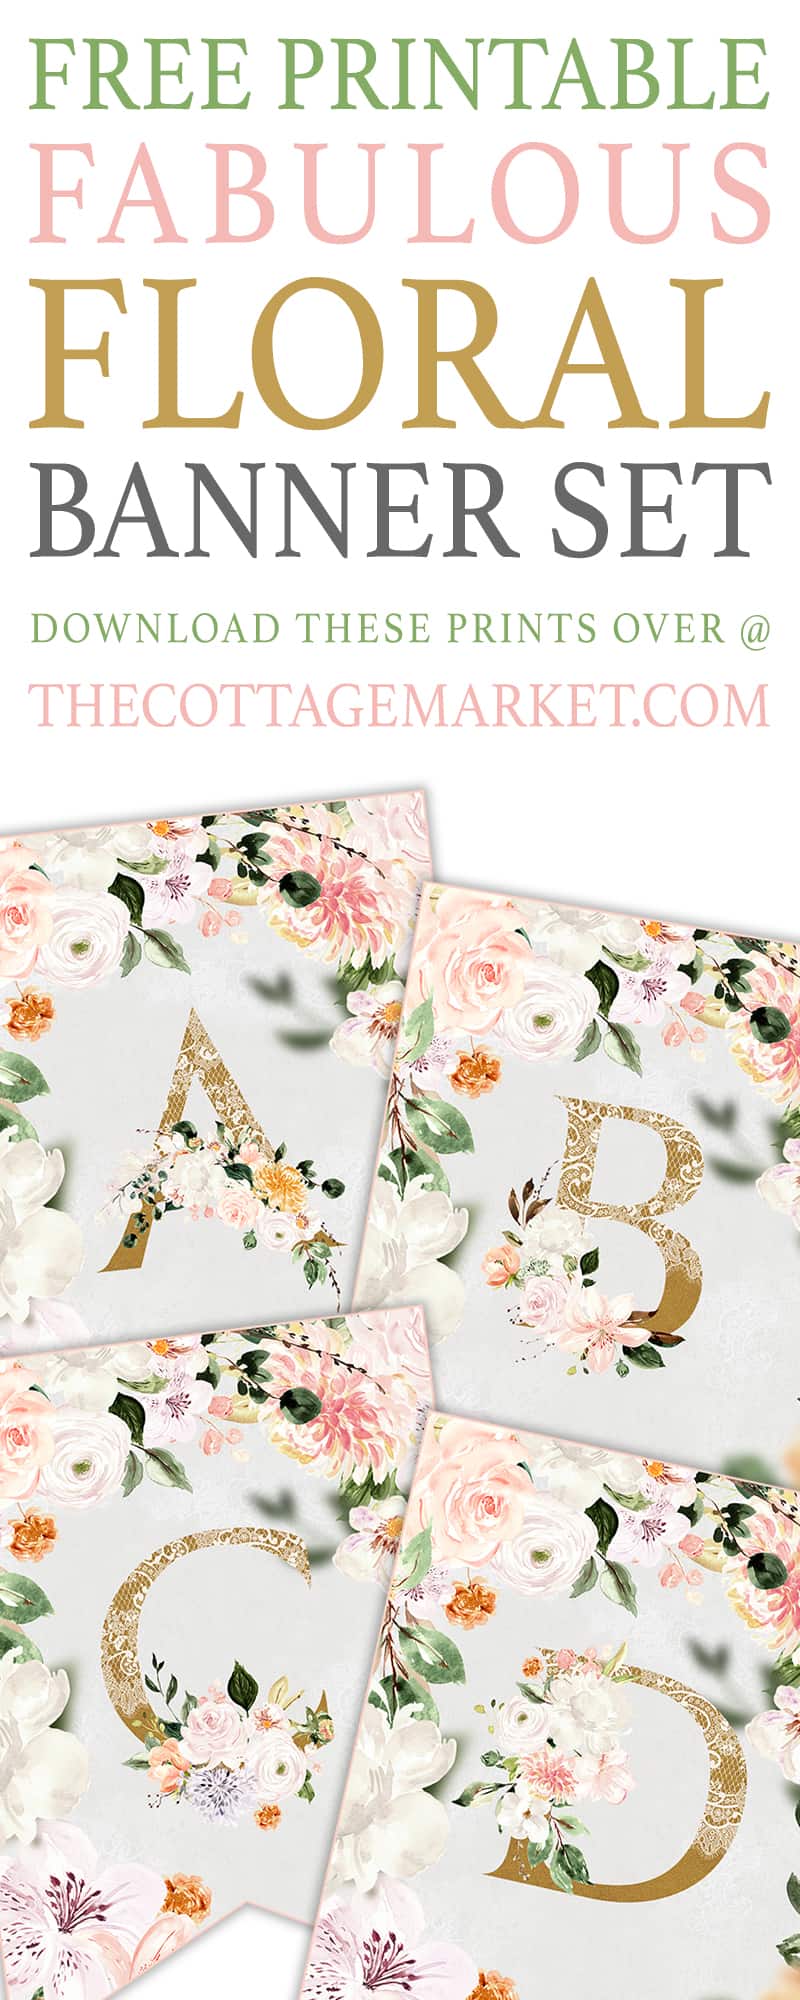 This Free Printable Fabulous Floral Banner Set is waiting for you to create the most amazing Banner for your next celebration.  Perfect for a Wedding, Baby Shower, Birthday,